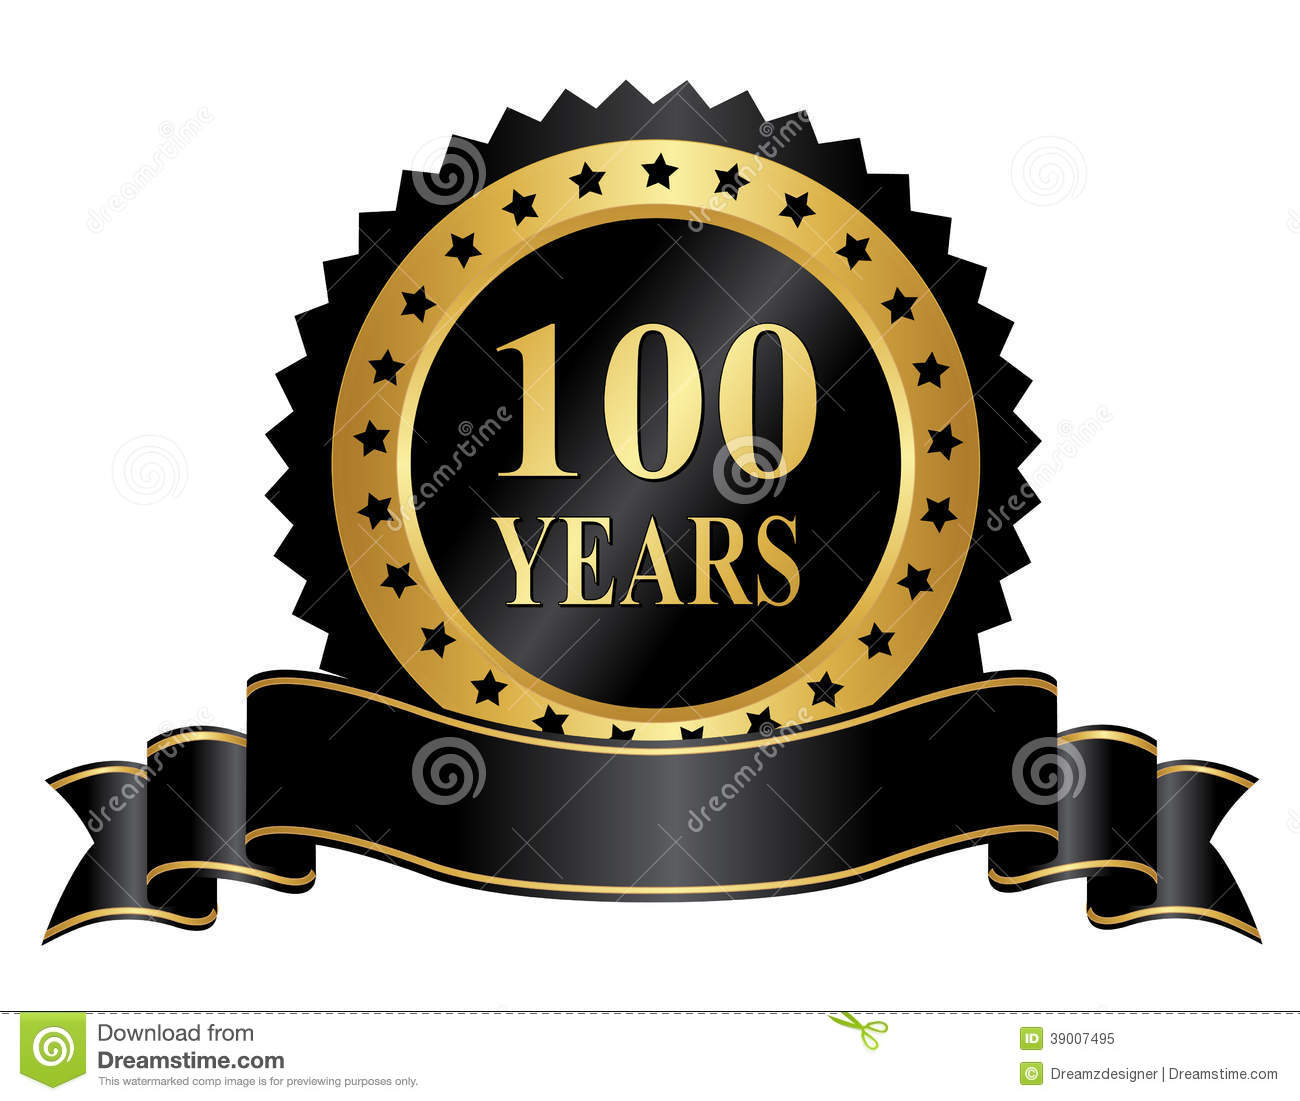 Elegant 100 Years Anniversary Stamp With Ribbon Stock Vector   Image